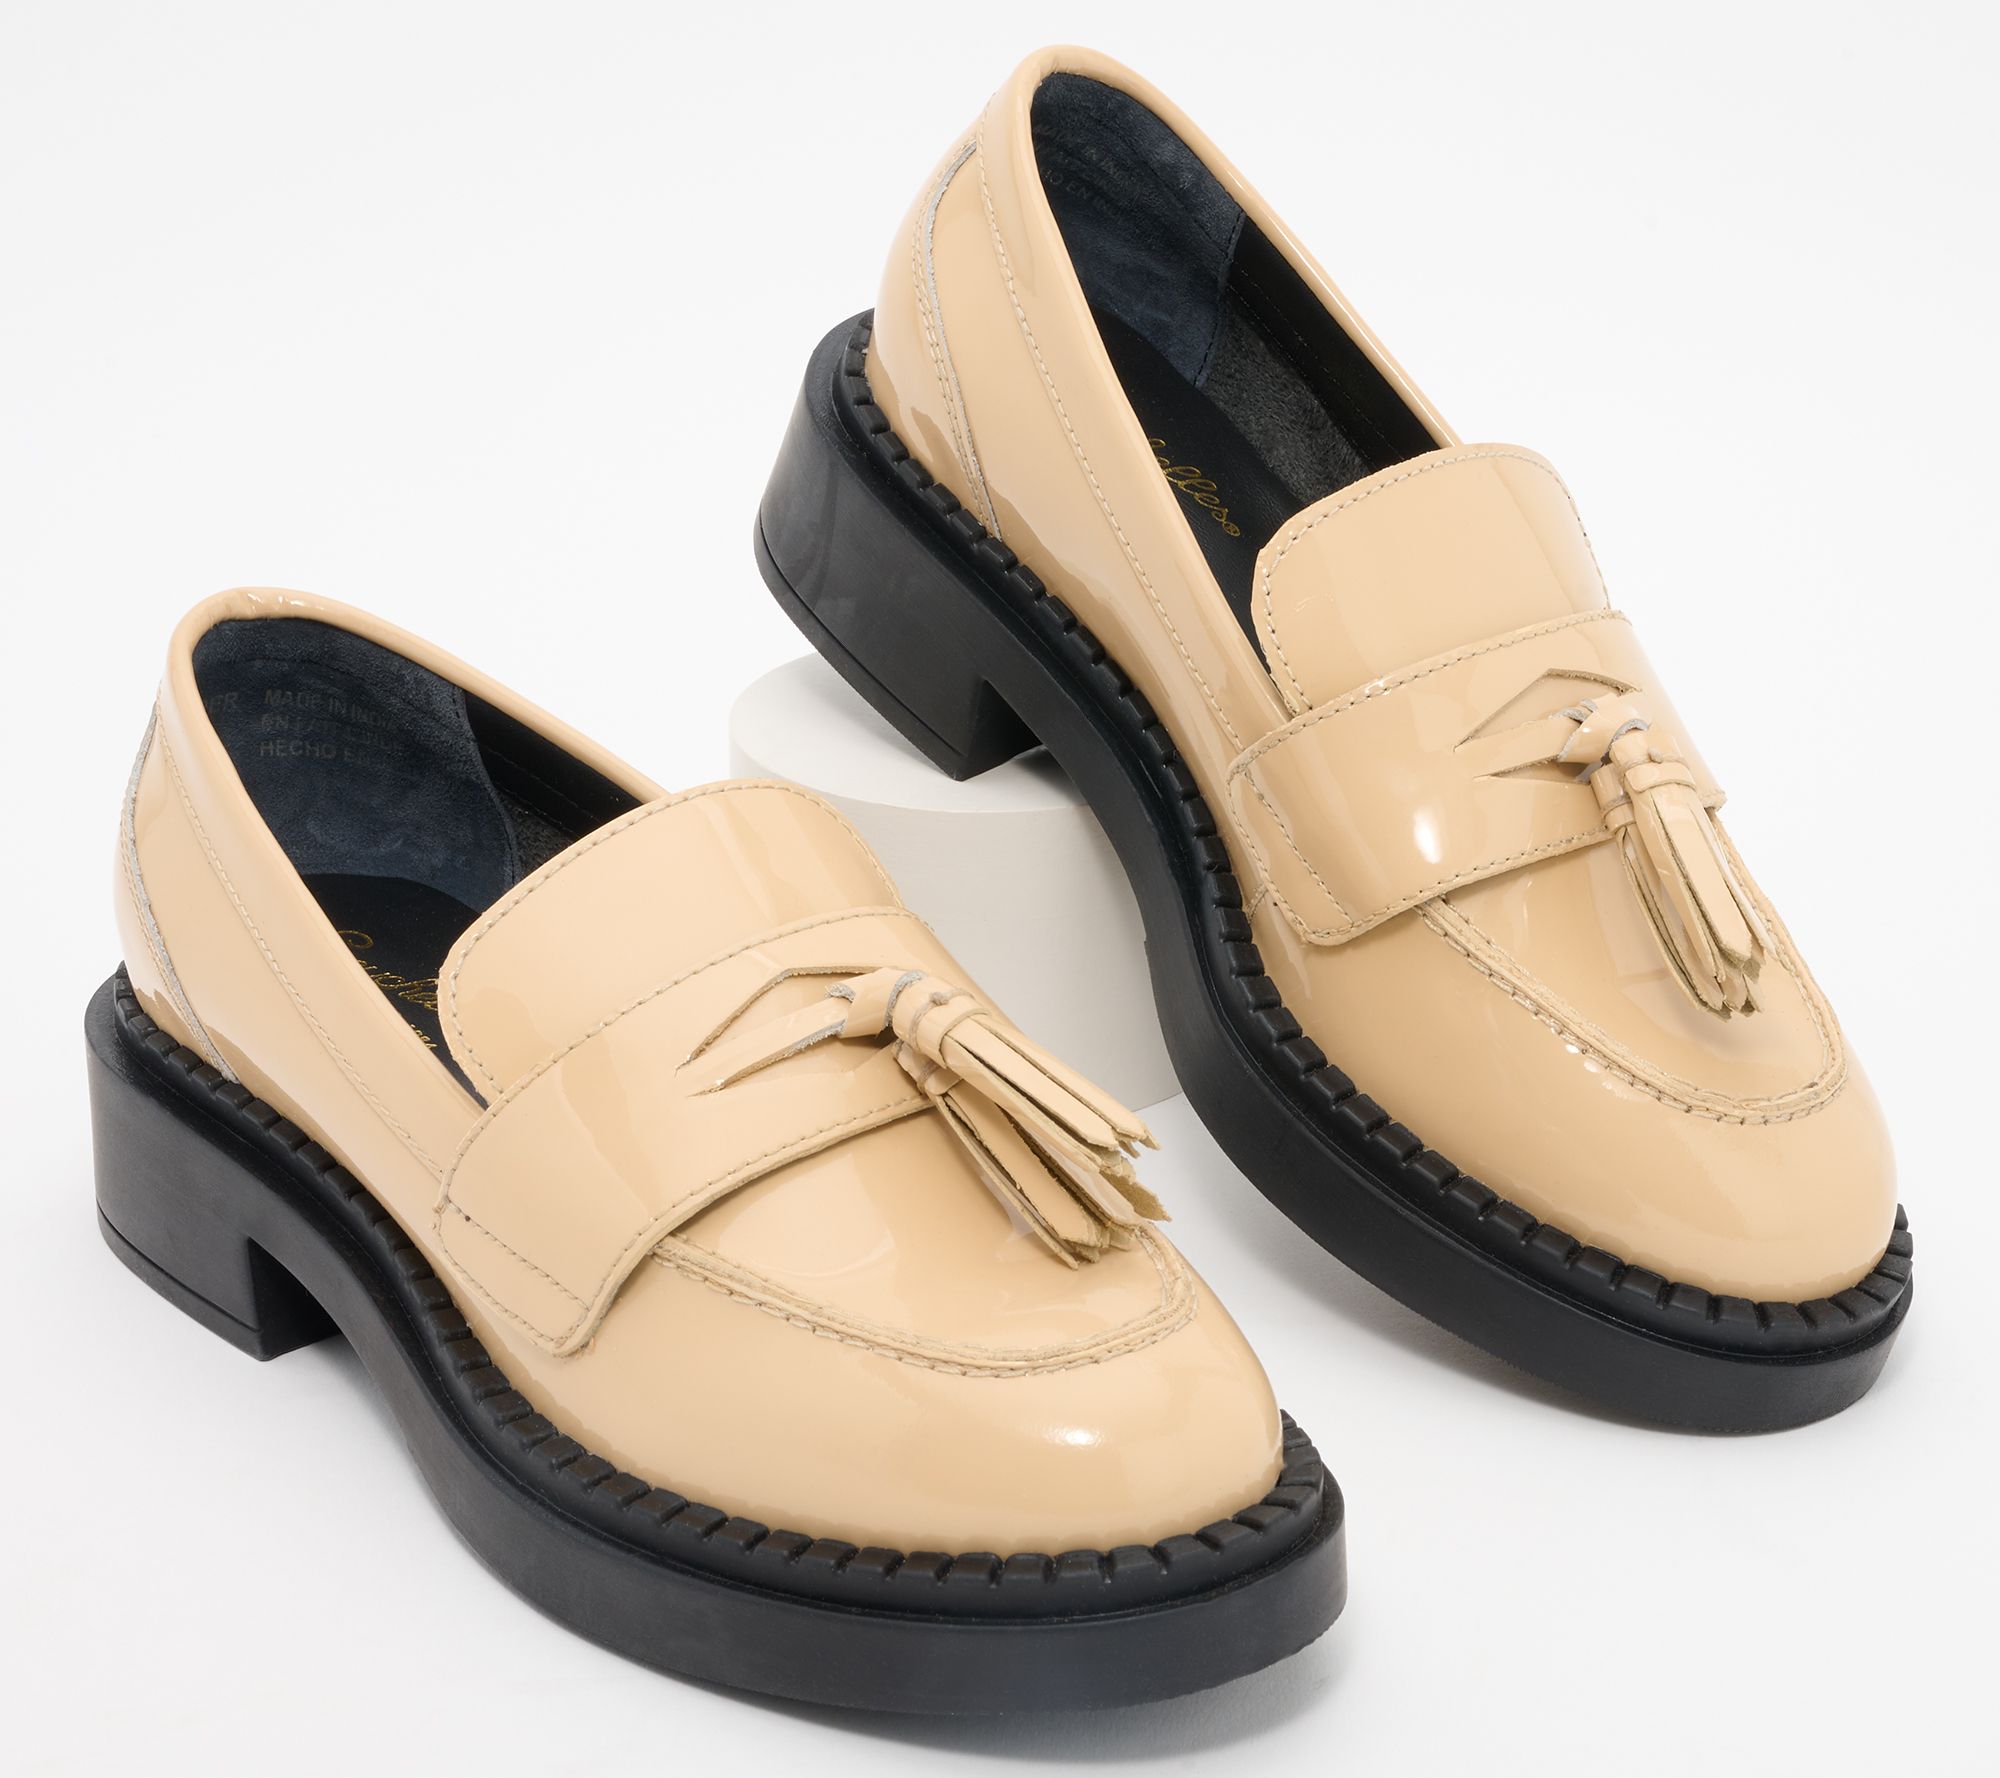 Seychelles Leather Loafers - Final Call - QVC.com